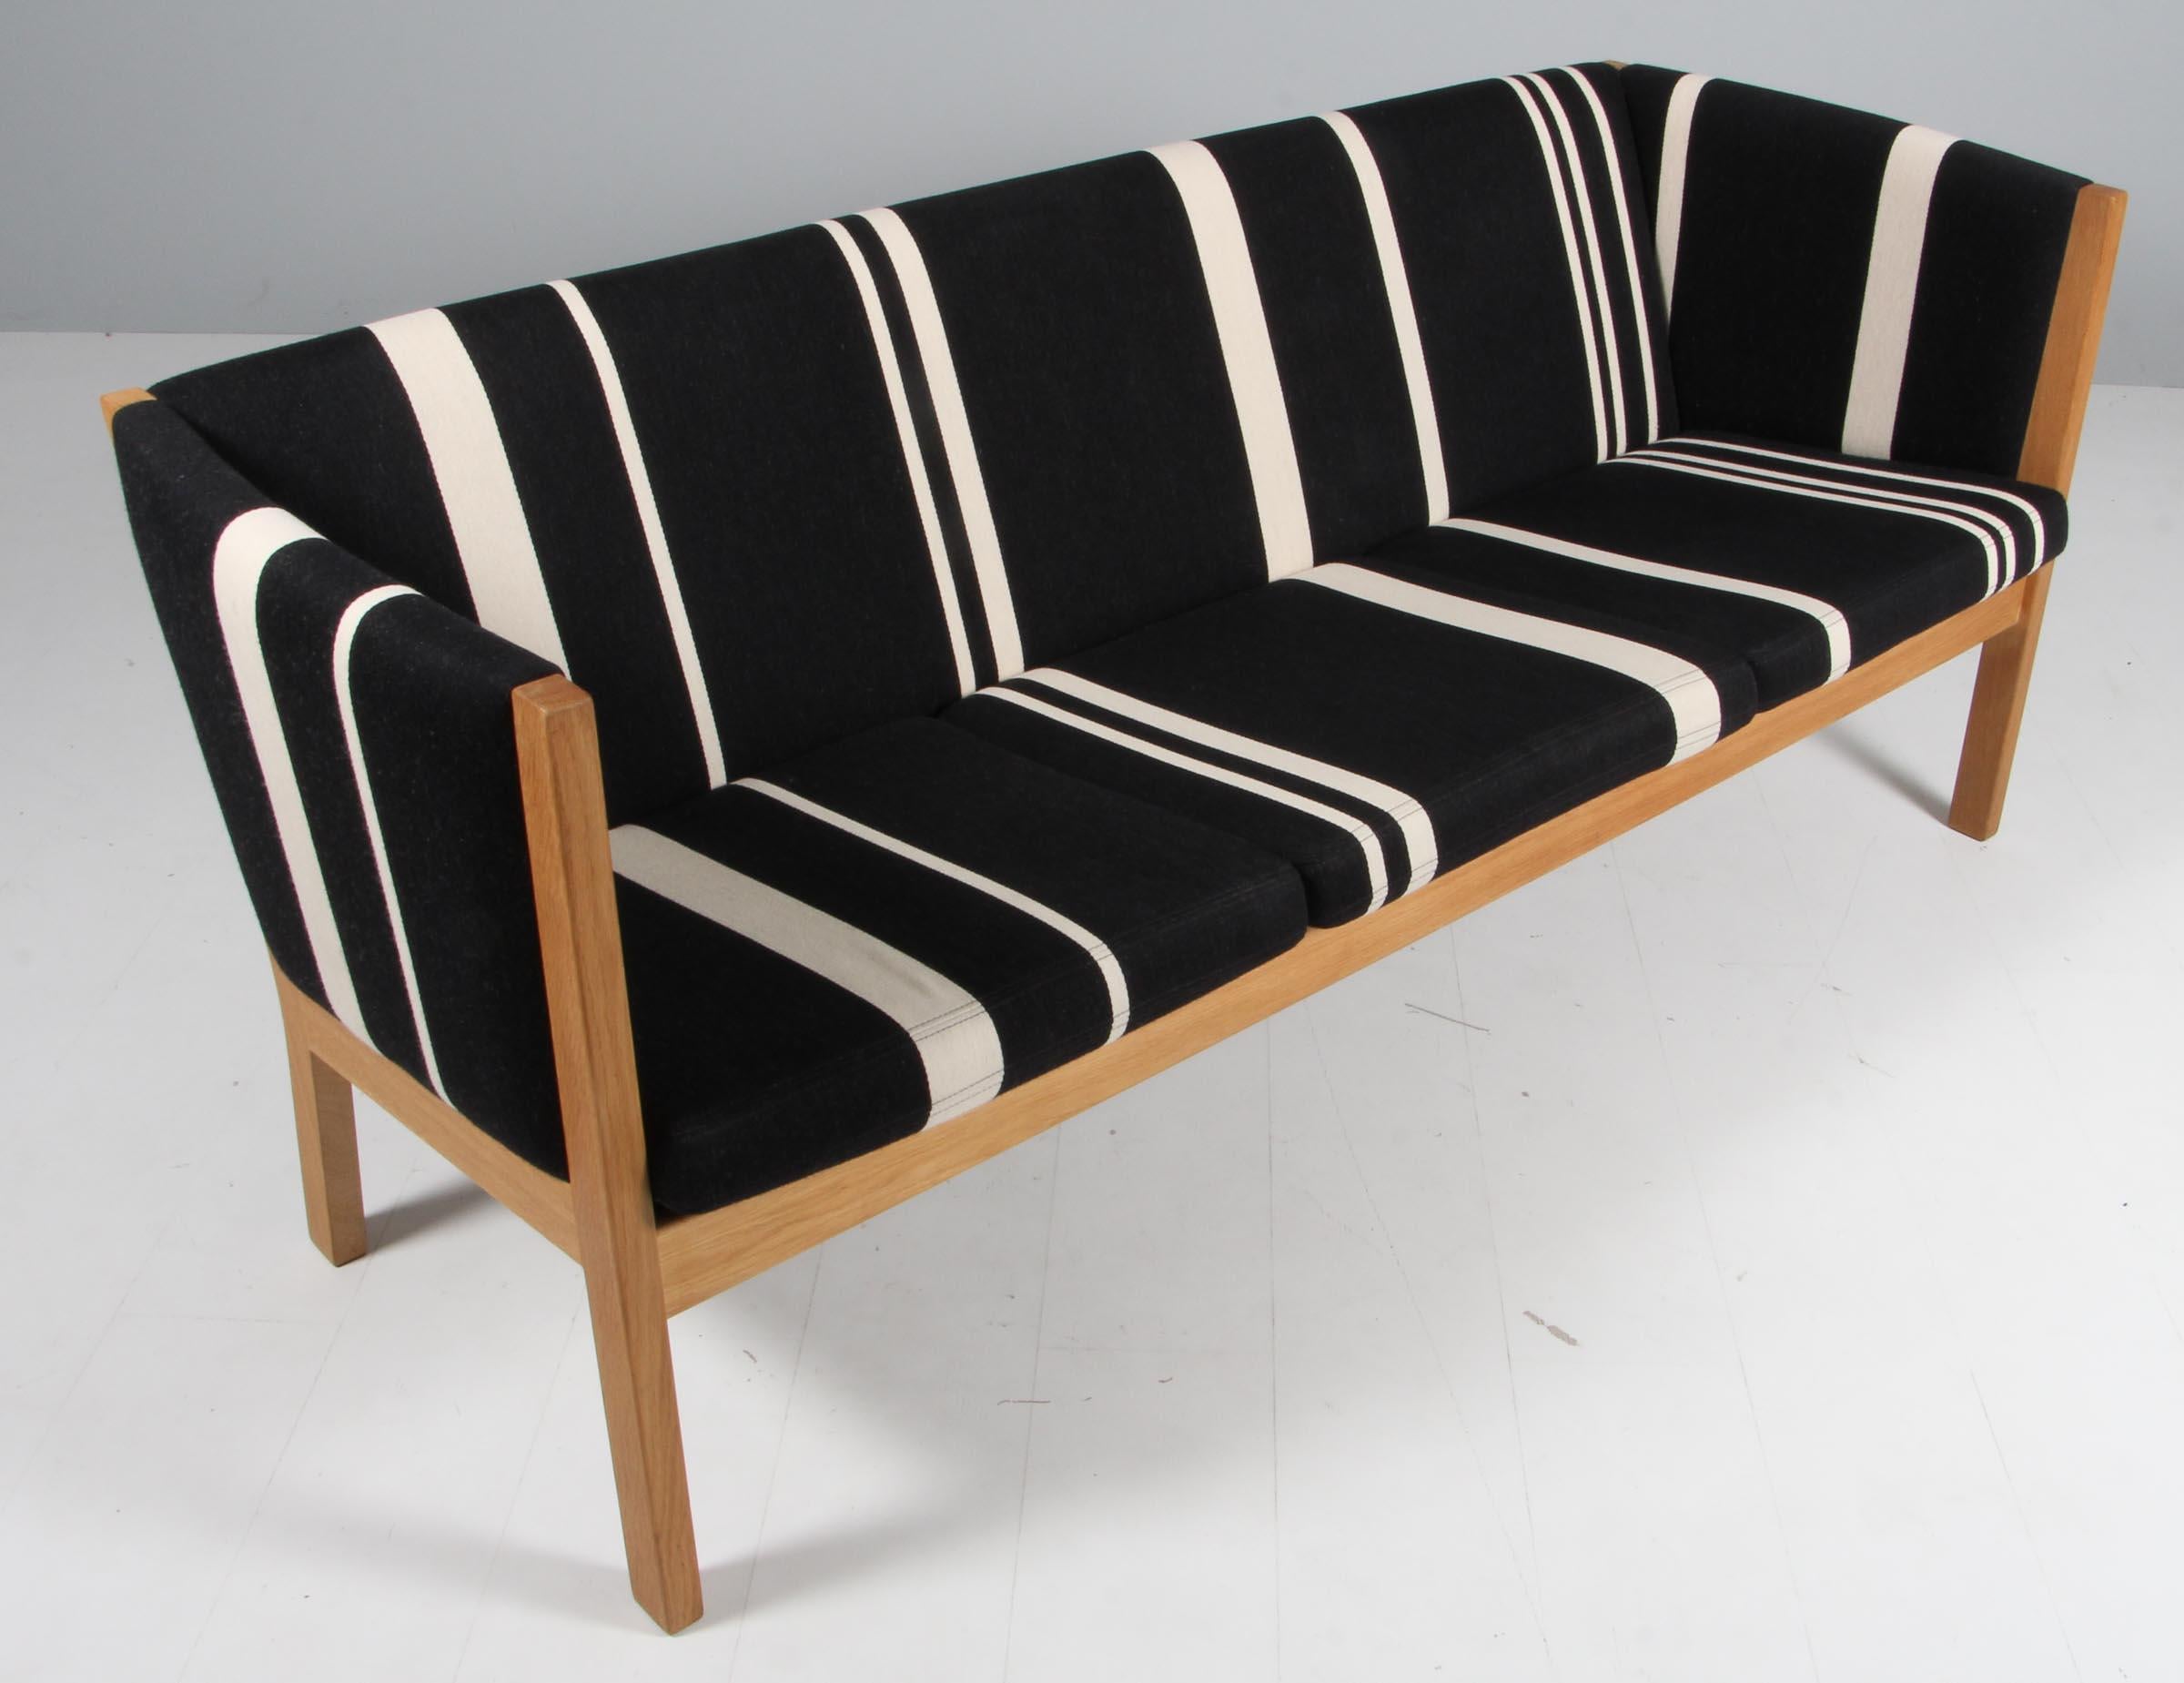 Hans J. Wegner three-seat sofa, original upholstered with striped Savak wool.

Frame in solid soap treated oak.

Model 285/3, produced by GETAMA.